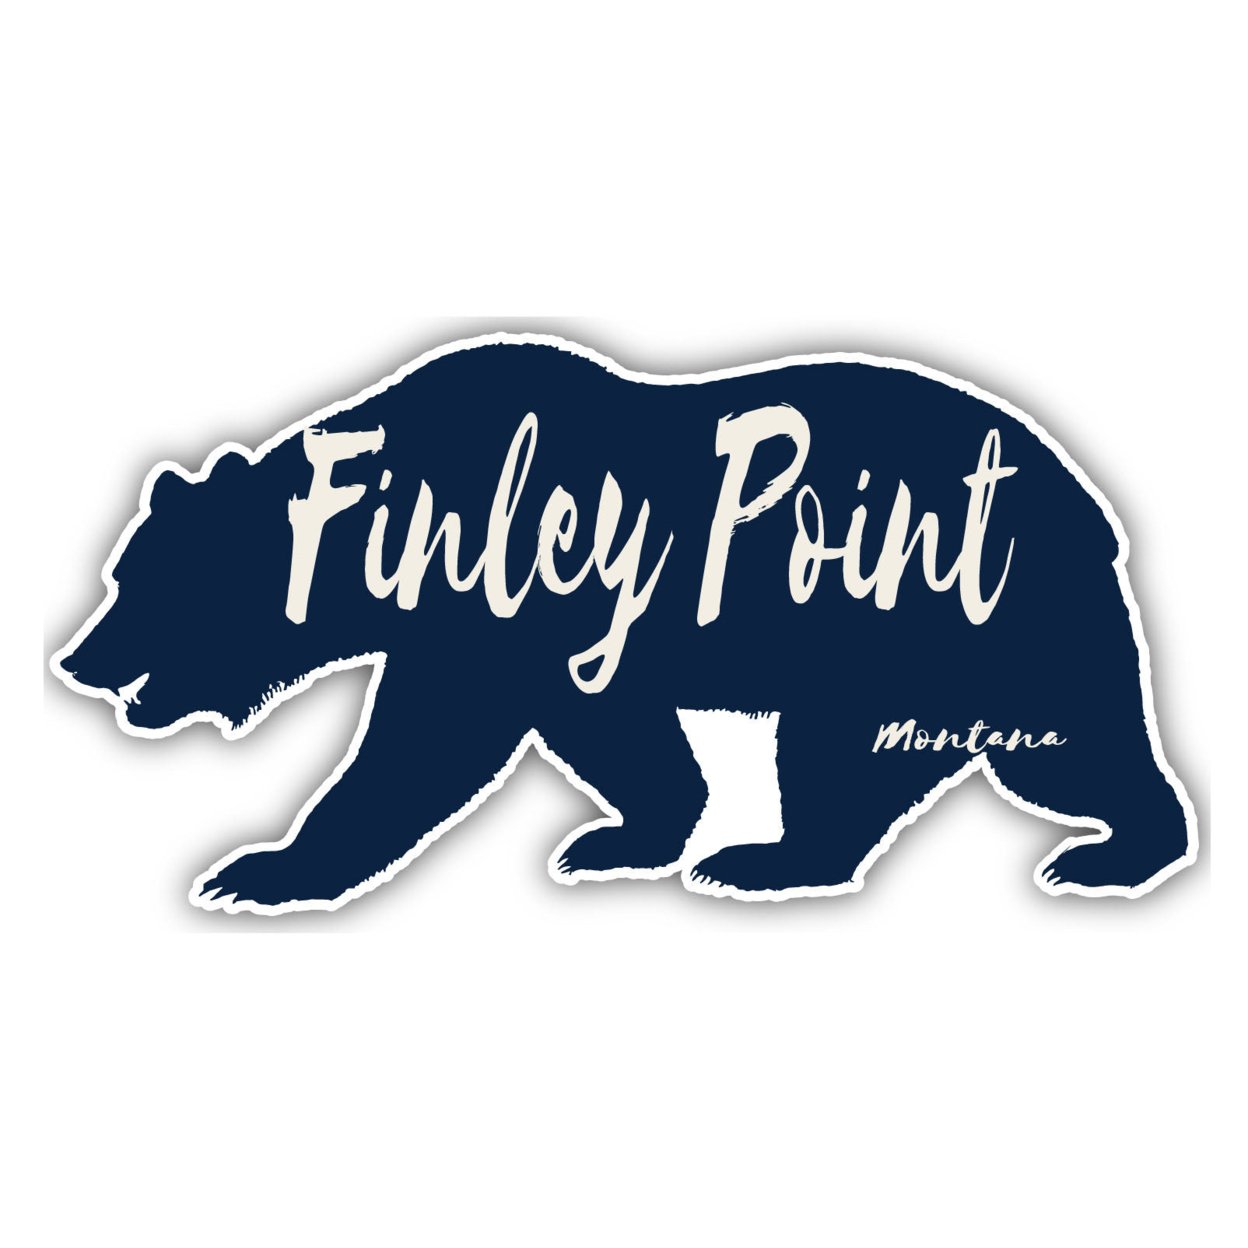 Finley Point Montana Souvenir Decorative Stickers (Choose Theme And Size) - 4-Pack, 10-Inch, Bear